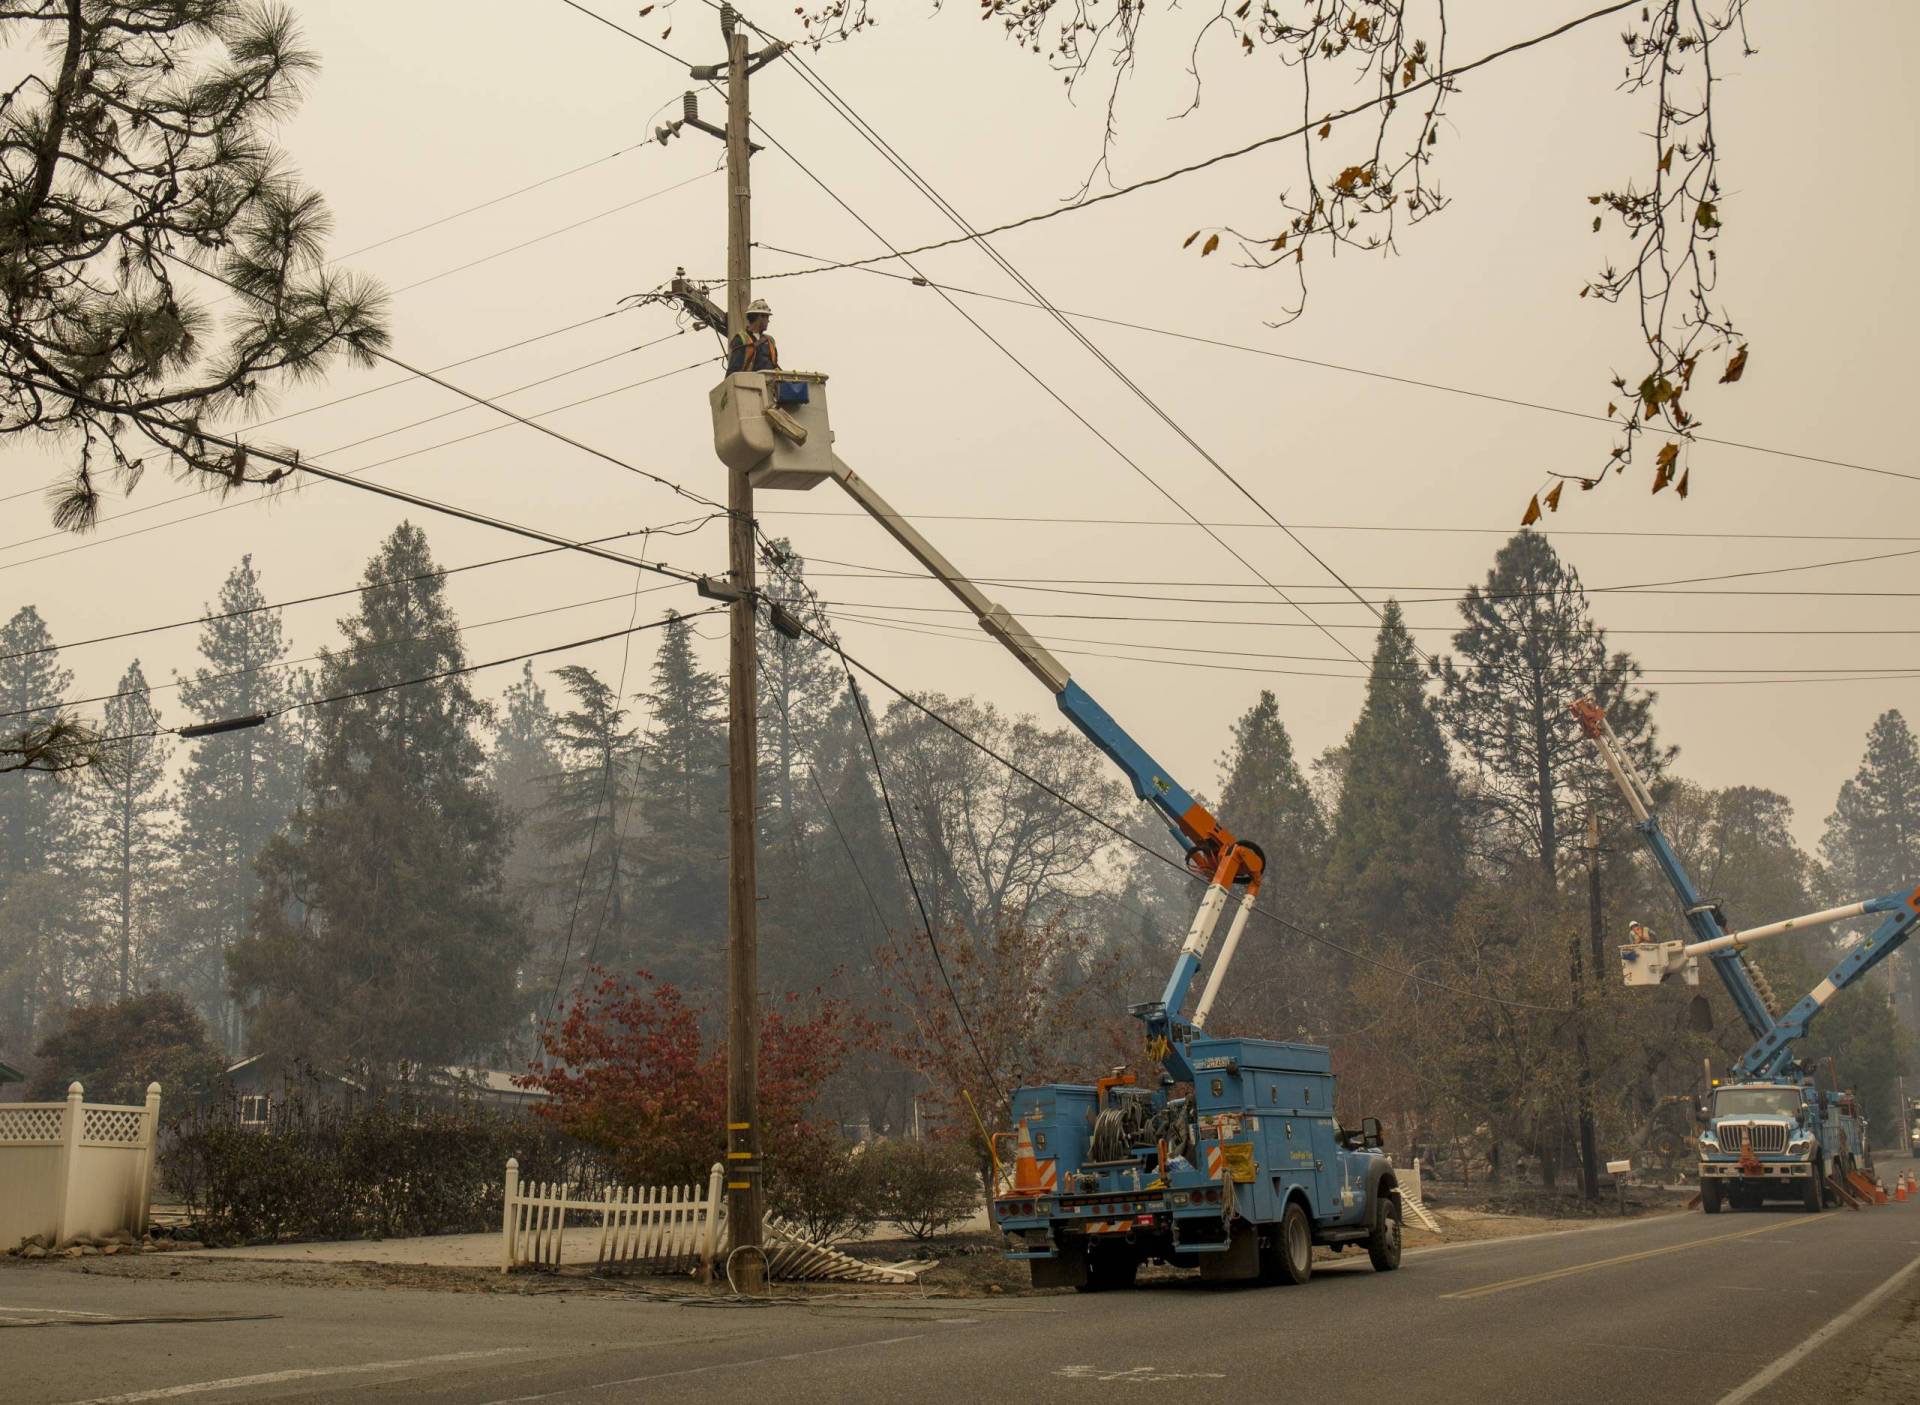 PG&E workers cut damaged power lines near Paradise on Nov. 13, 2018, five days after a PG&E transmission line sparked the Camp Fire, the deadliest and most destructive wildfire in modern California history.